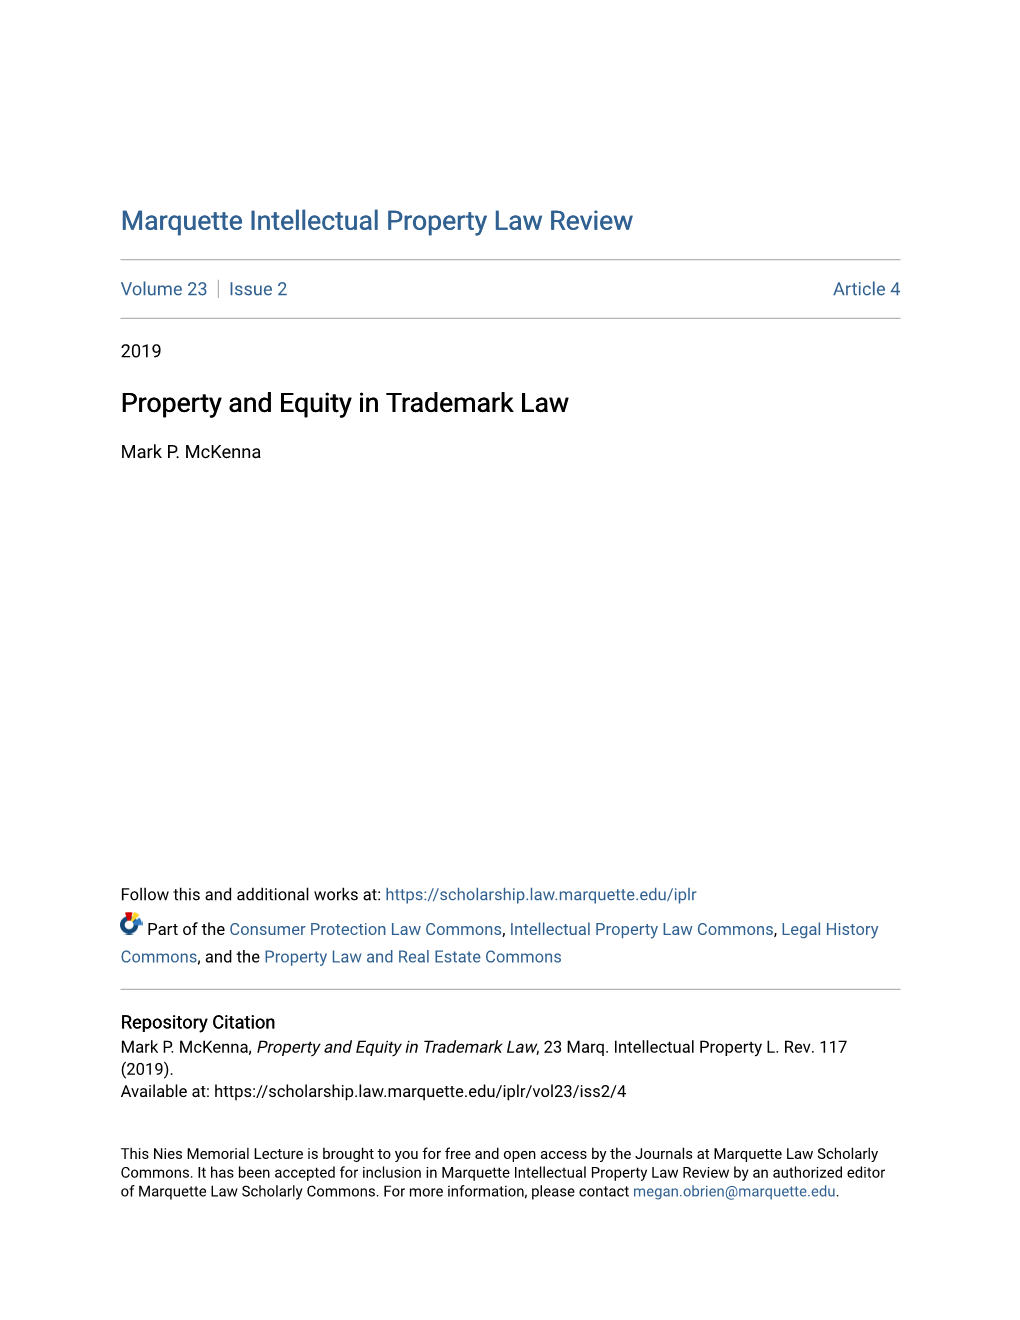 Property and Equity in Trademark Law